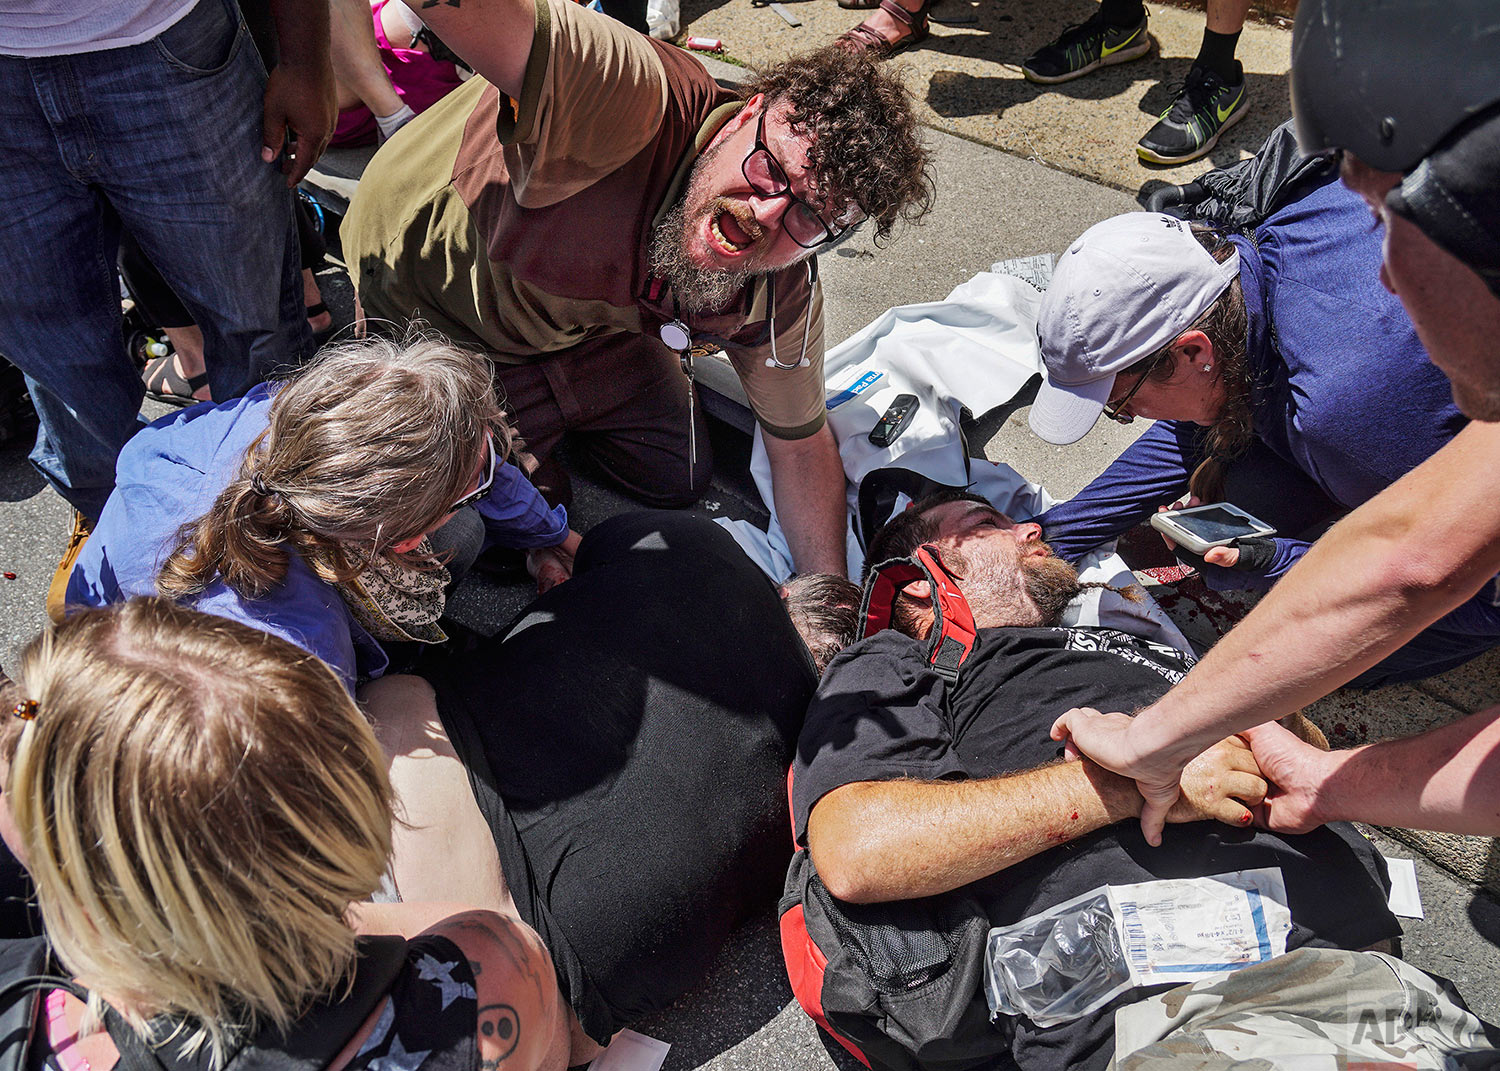  In this Saturday, Aug. 12, 2017 photo, responders work with victims at the scene where a man identified by police as James Alex Fields Jr., plowed a car into a crowd of people who had gathered to protest a white supremacist rally earlier in the day,